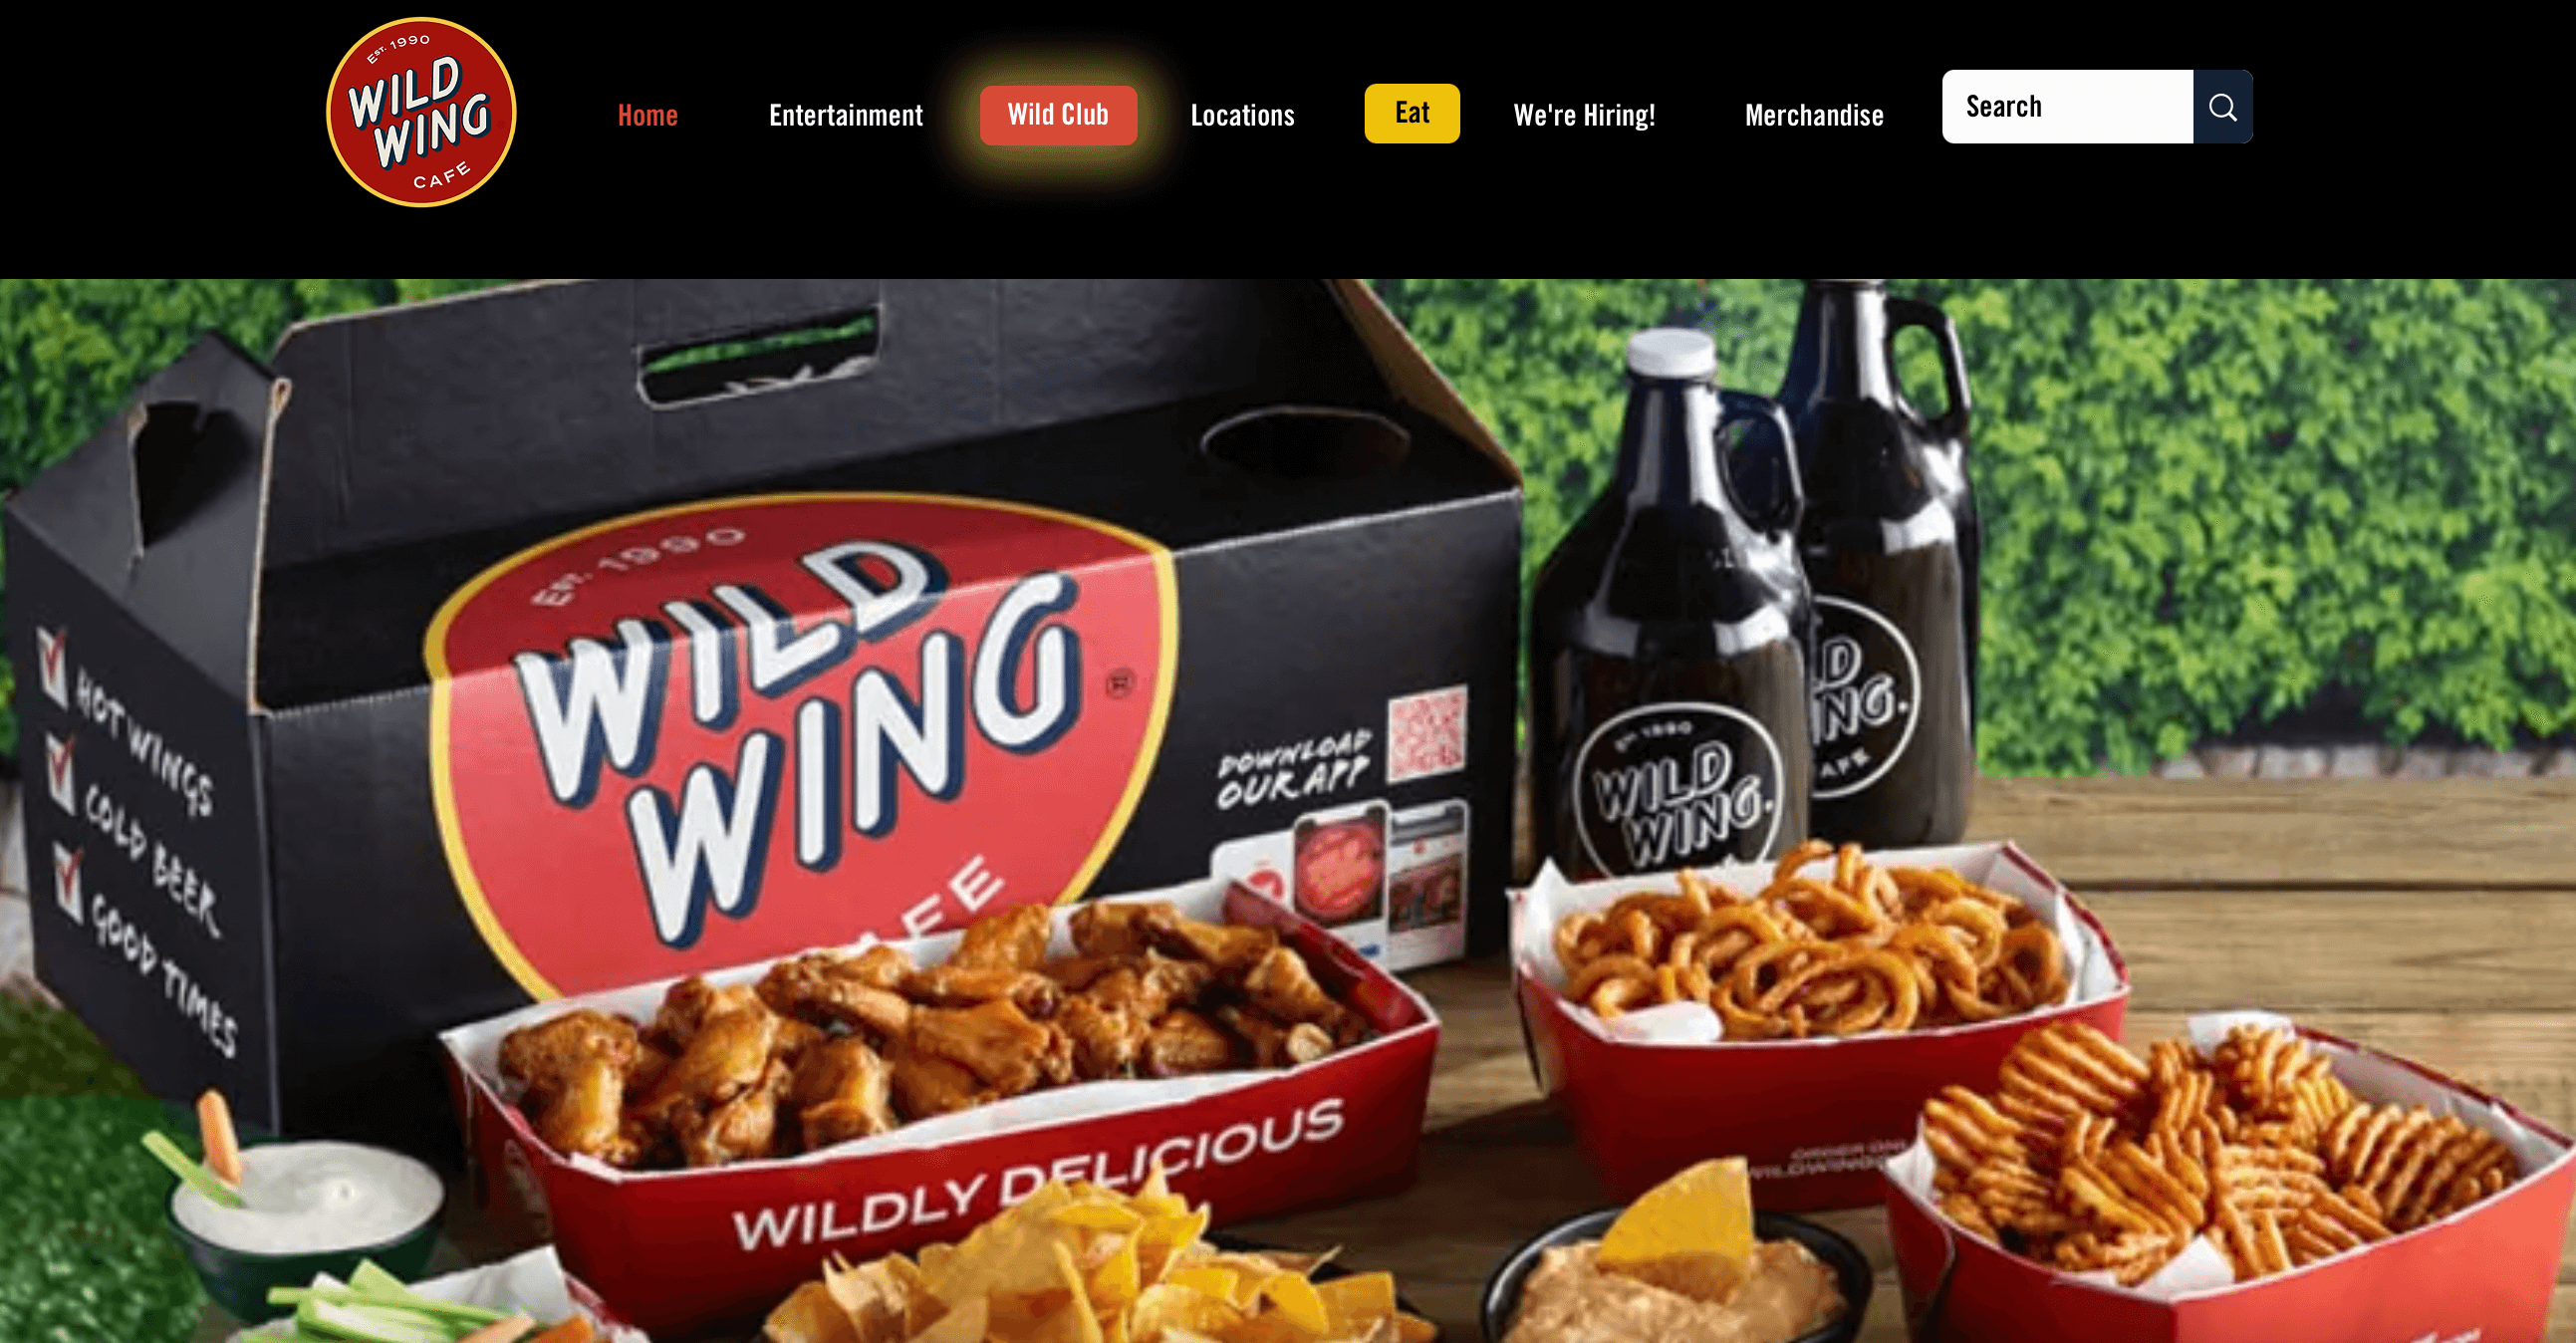 wild wing cafe